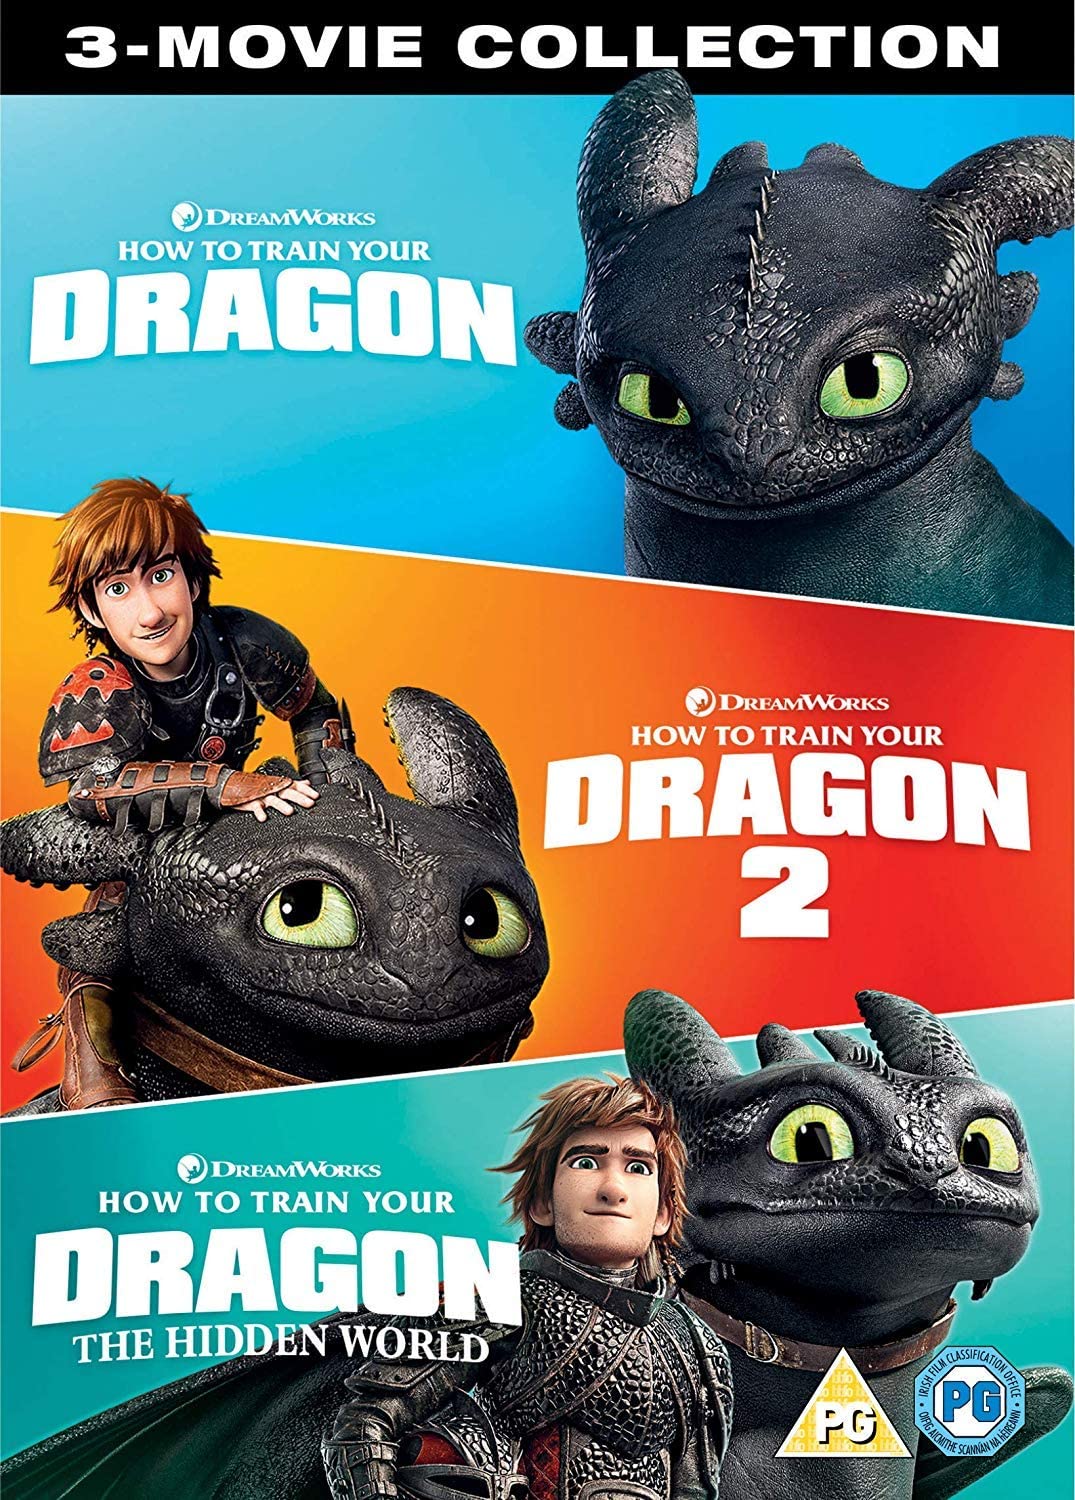 How To Train Your Dragon: 3 Film Collection (Dreamworks) (Blu-ray)